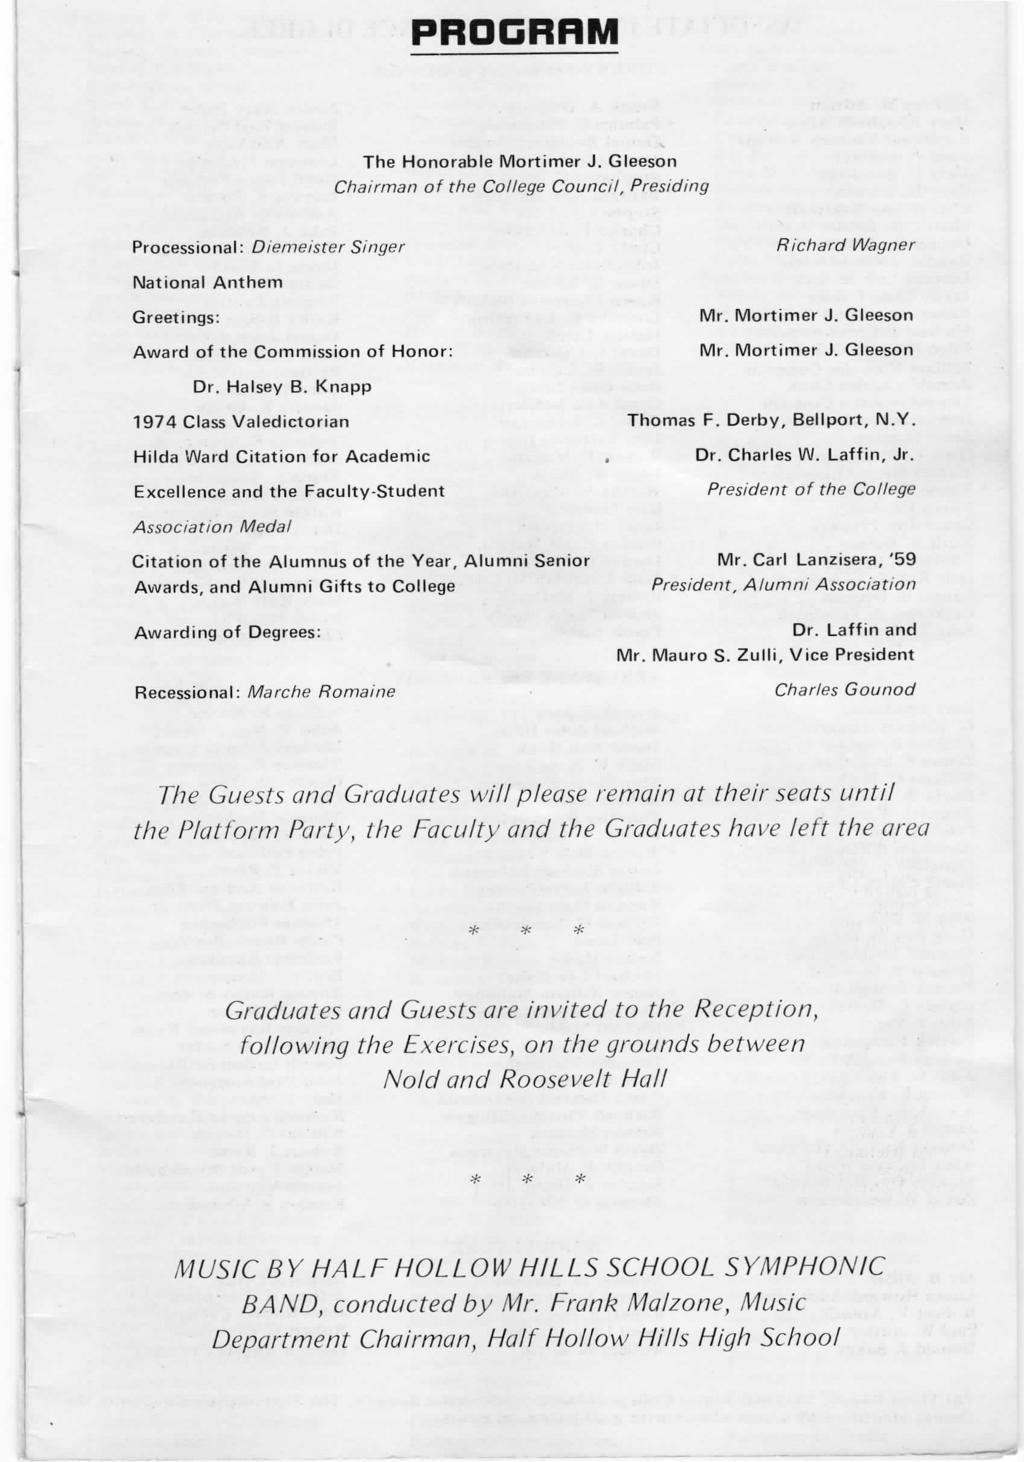 PROGRRM The Honorable Mortimer J. Gleeson Chairman of the College Council, Presiding Processional: Diemeister Singer National Anthem Greetings: Award of the Commission of Honor: Dr. Halsey B.